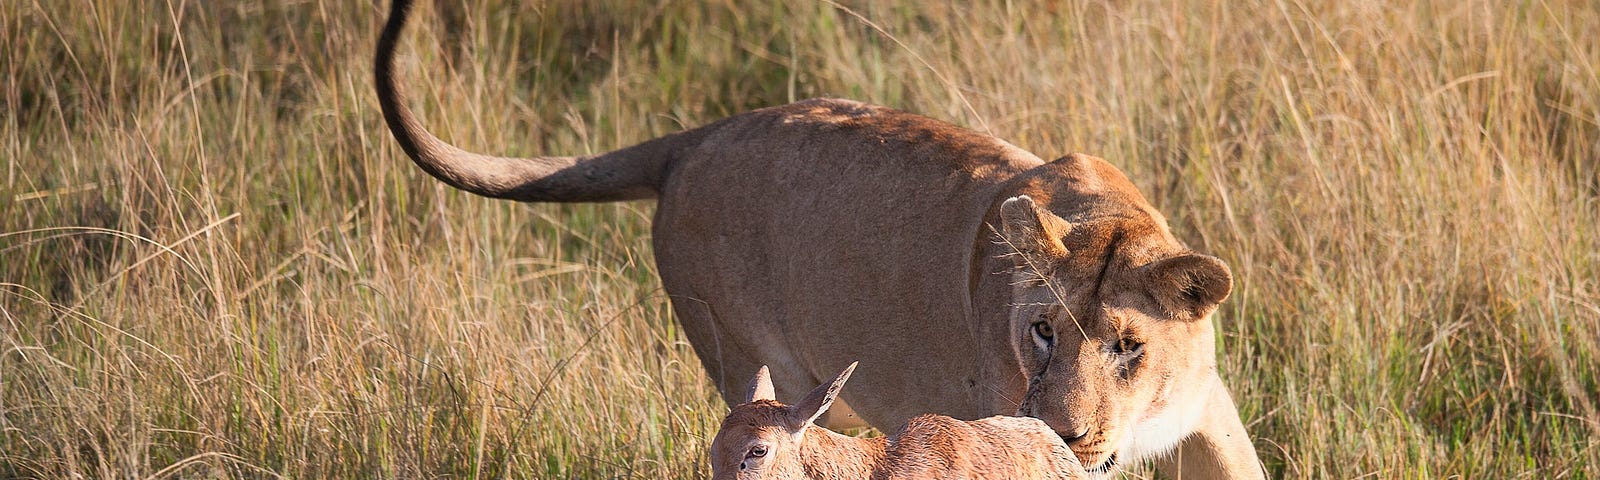 Lion hunting an antelope — a metaphor for meetings killing a company